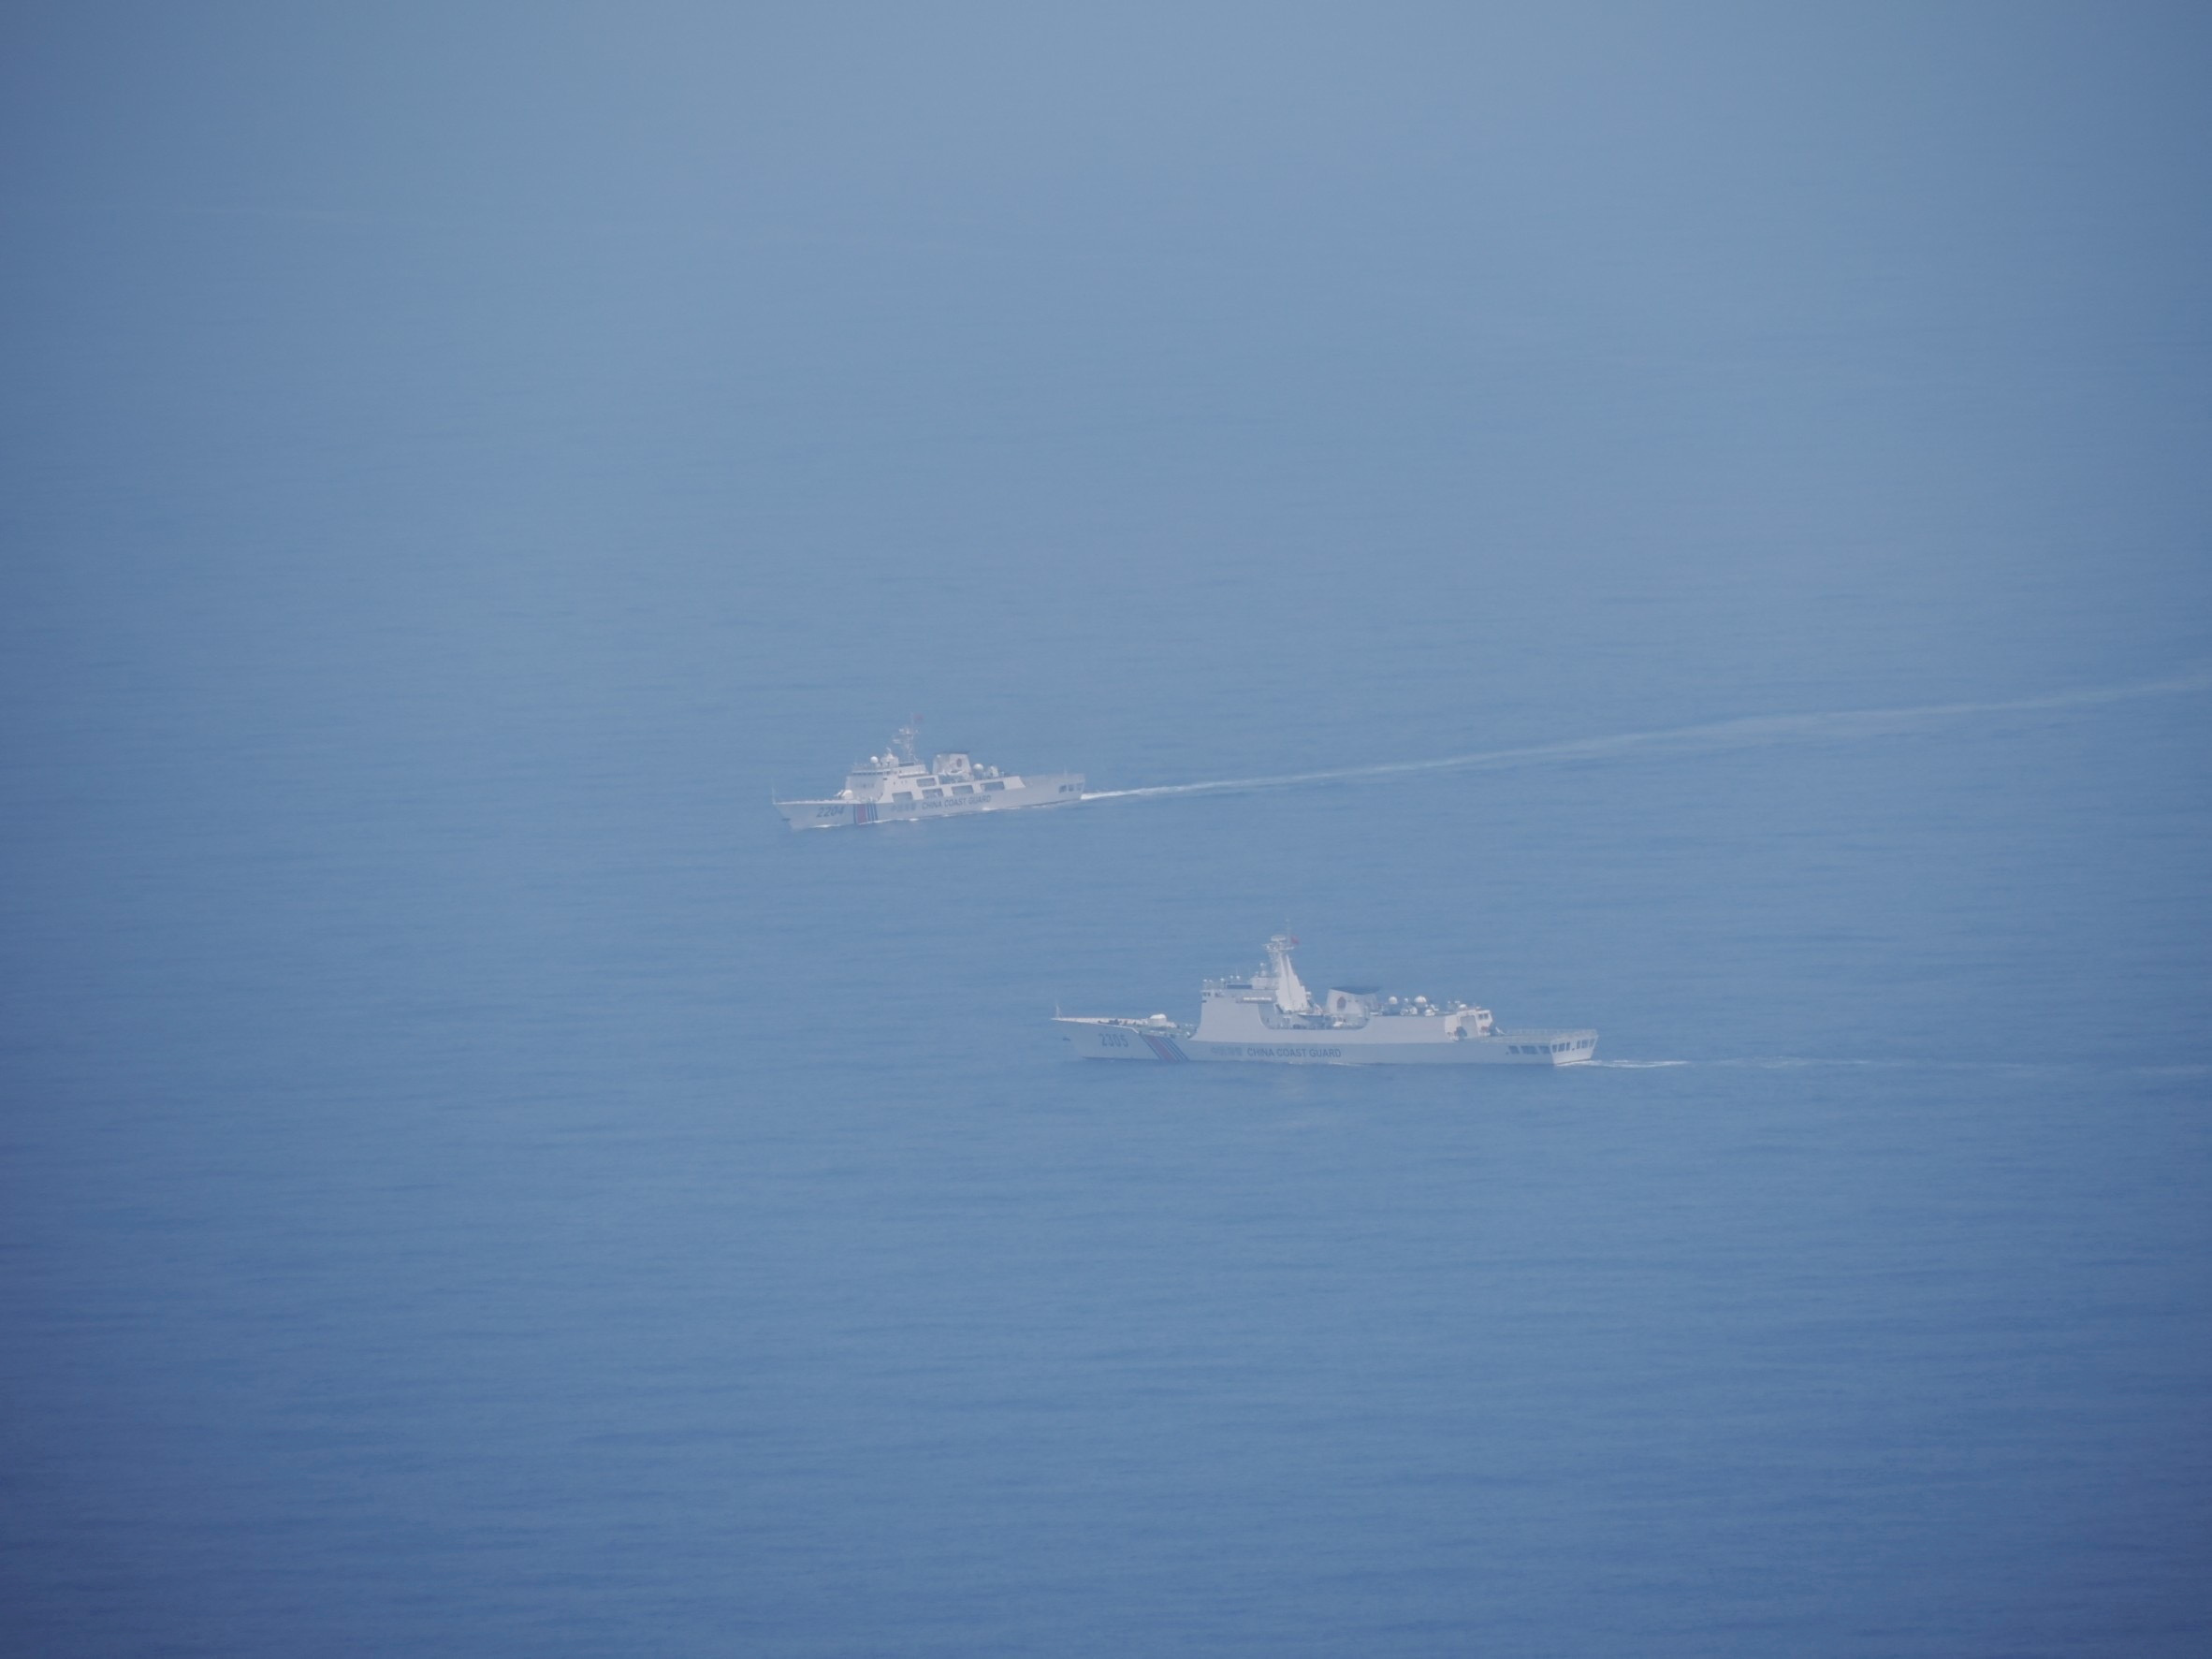 Chinese coastguard vessels are pictured while navigating at an undisclosed location in waters around Taiwan